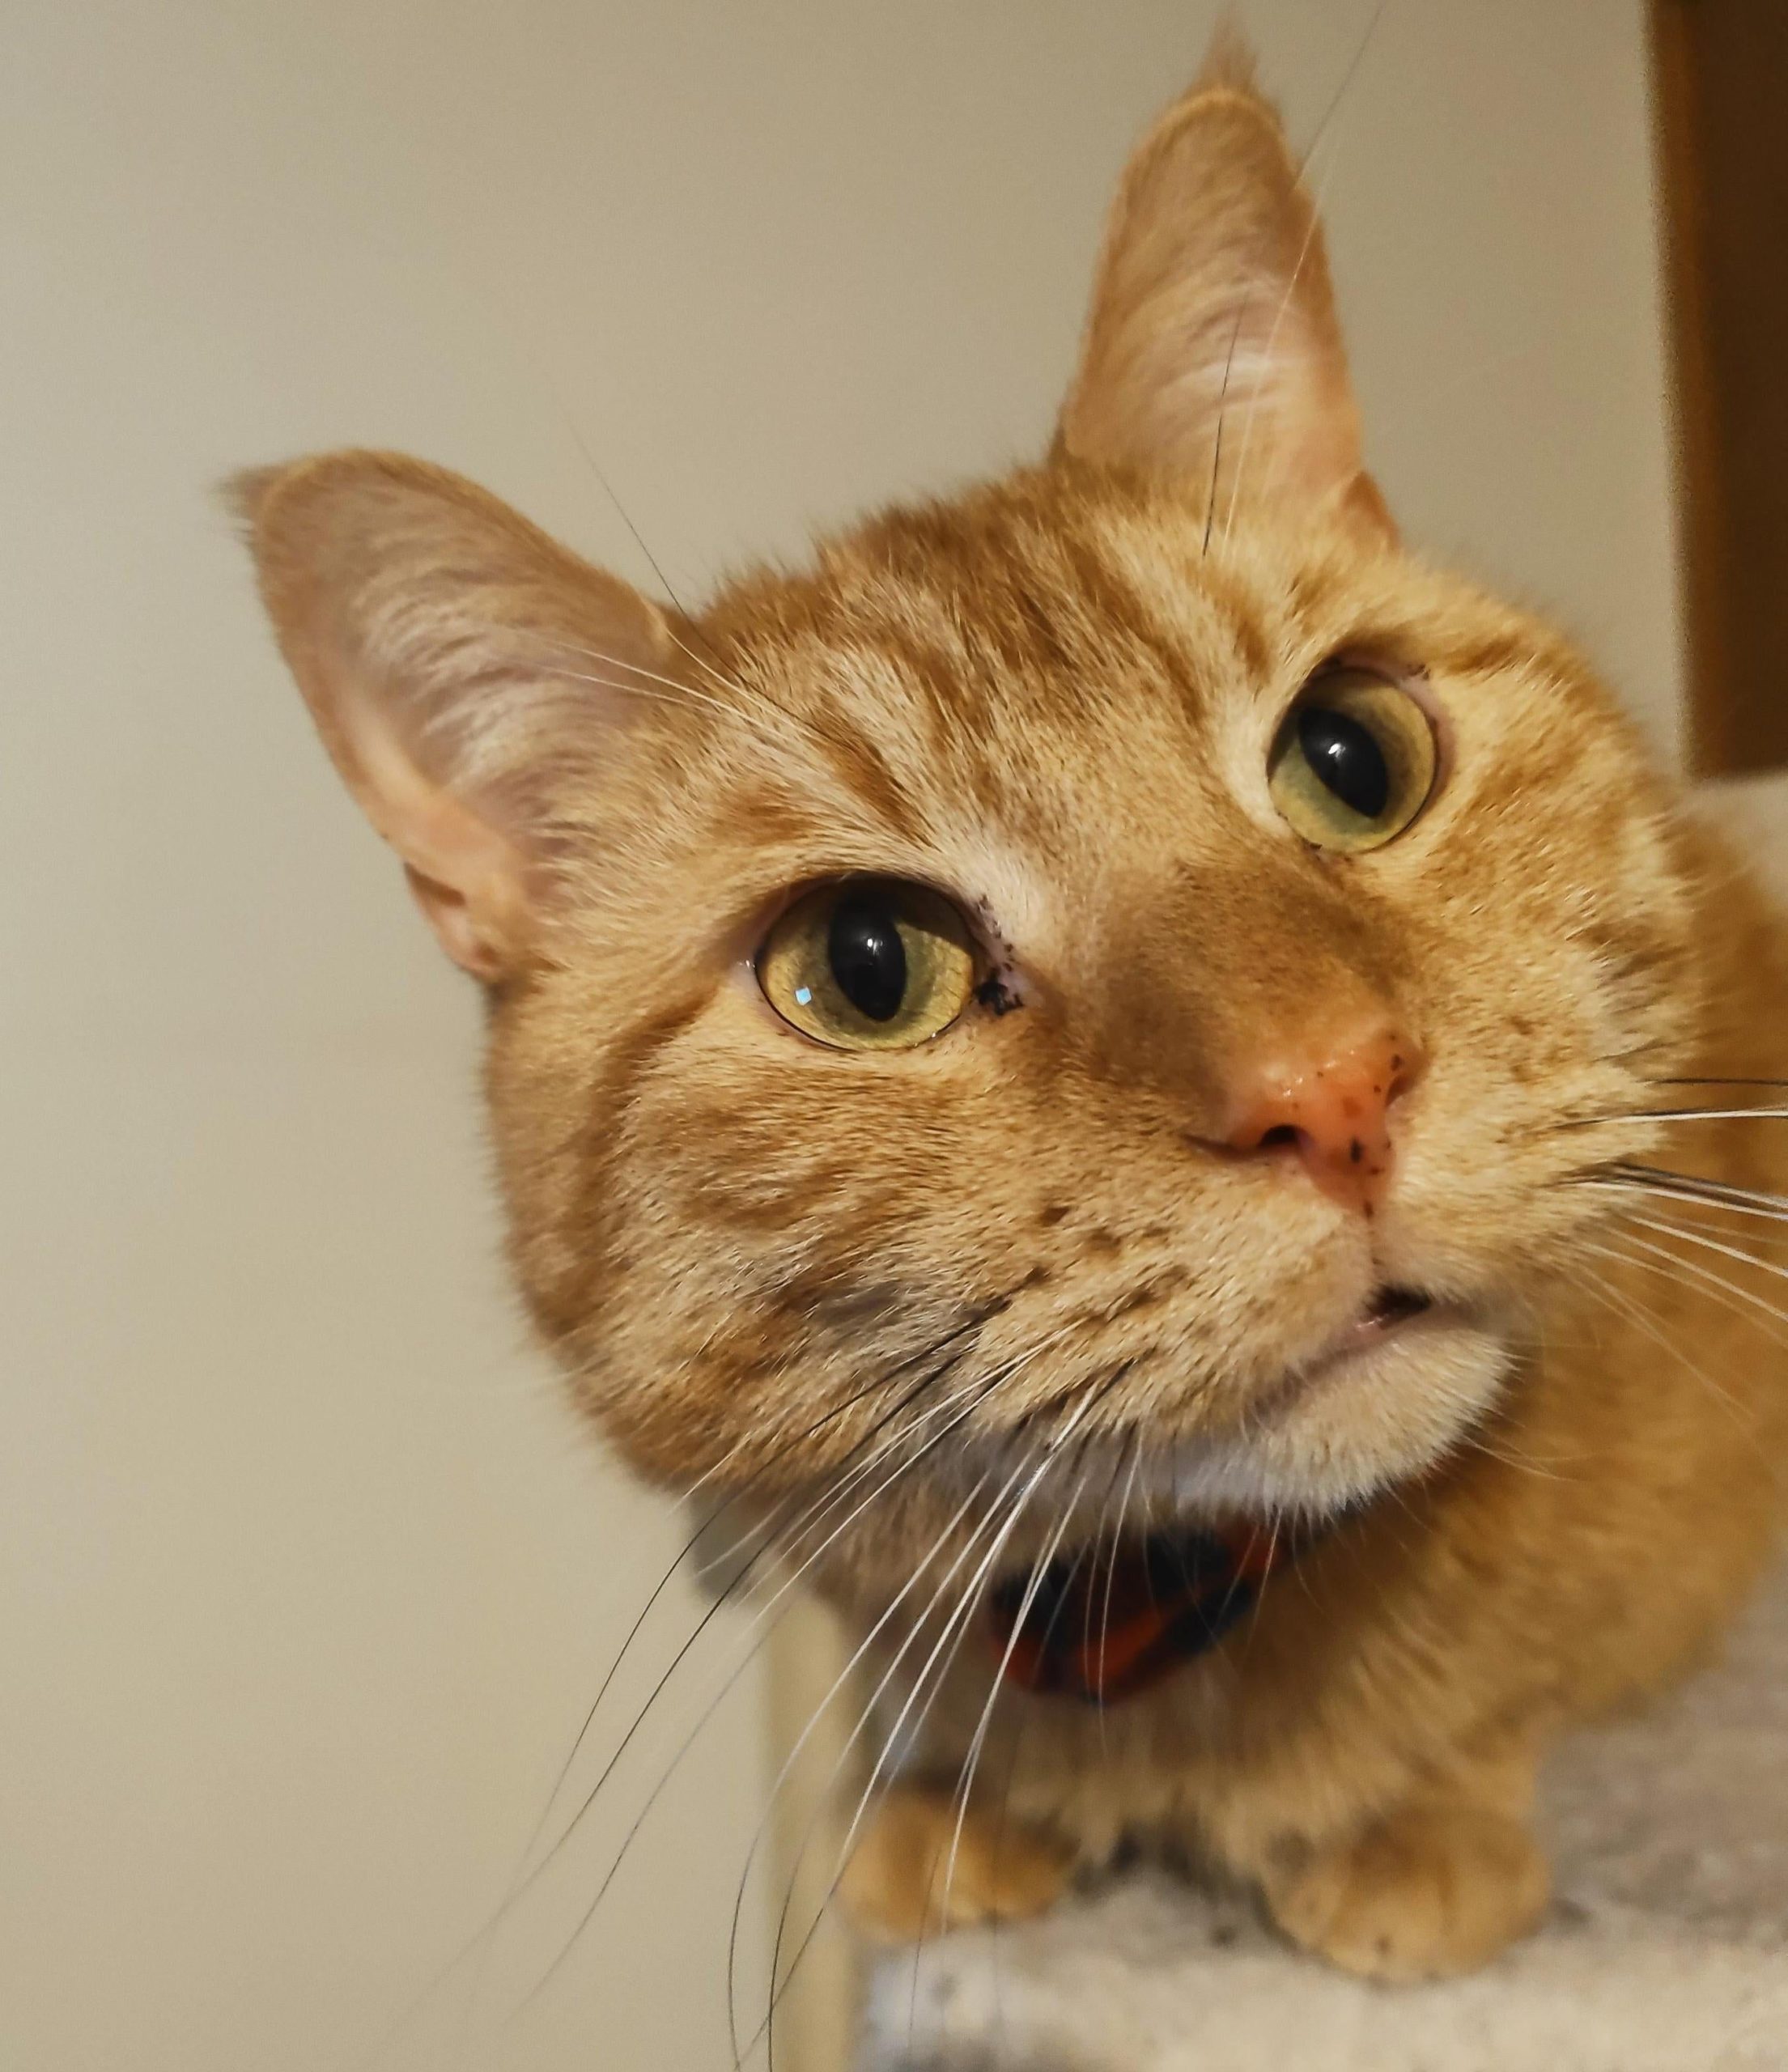 Cheddar the cat — and a possible scientist in the making? (Photo: Ed Cara)